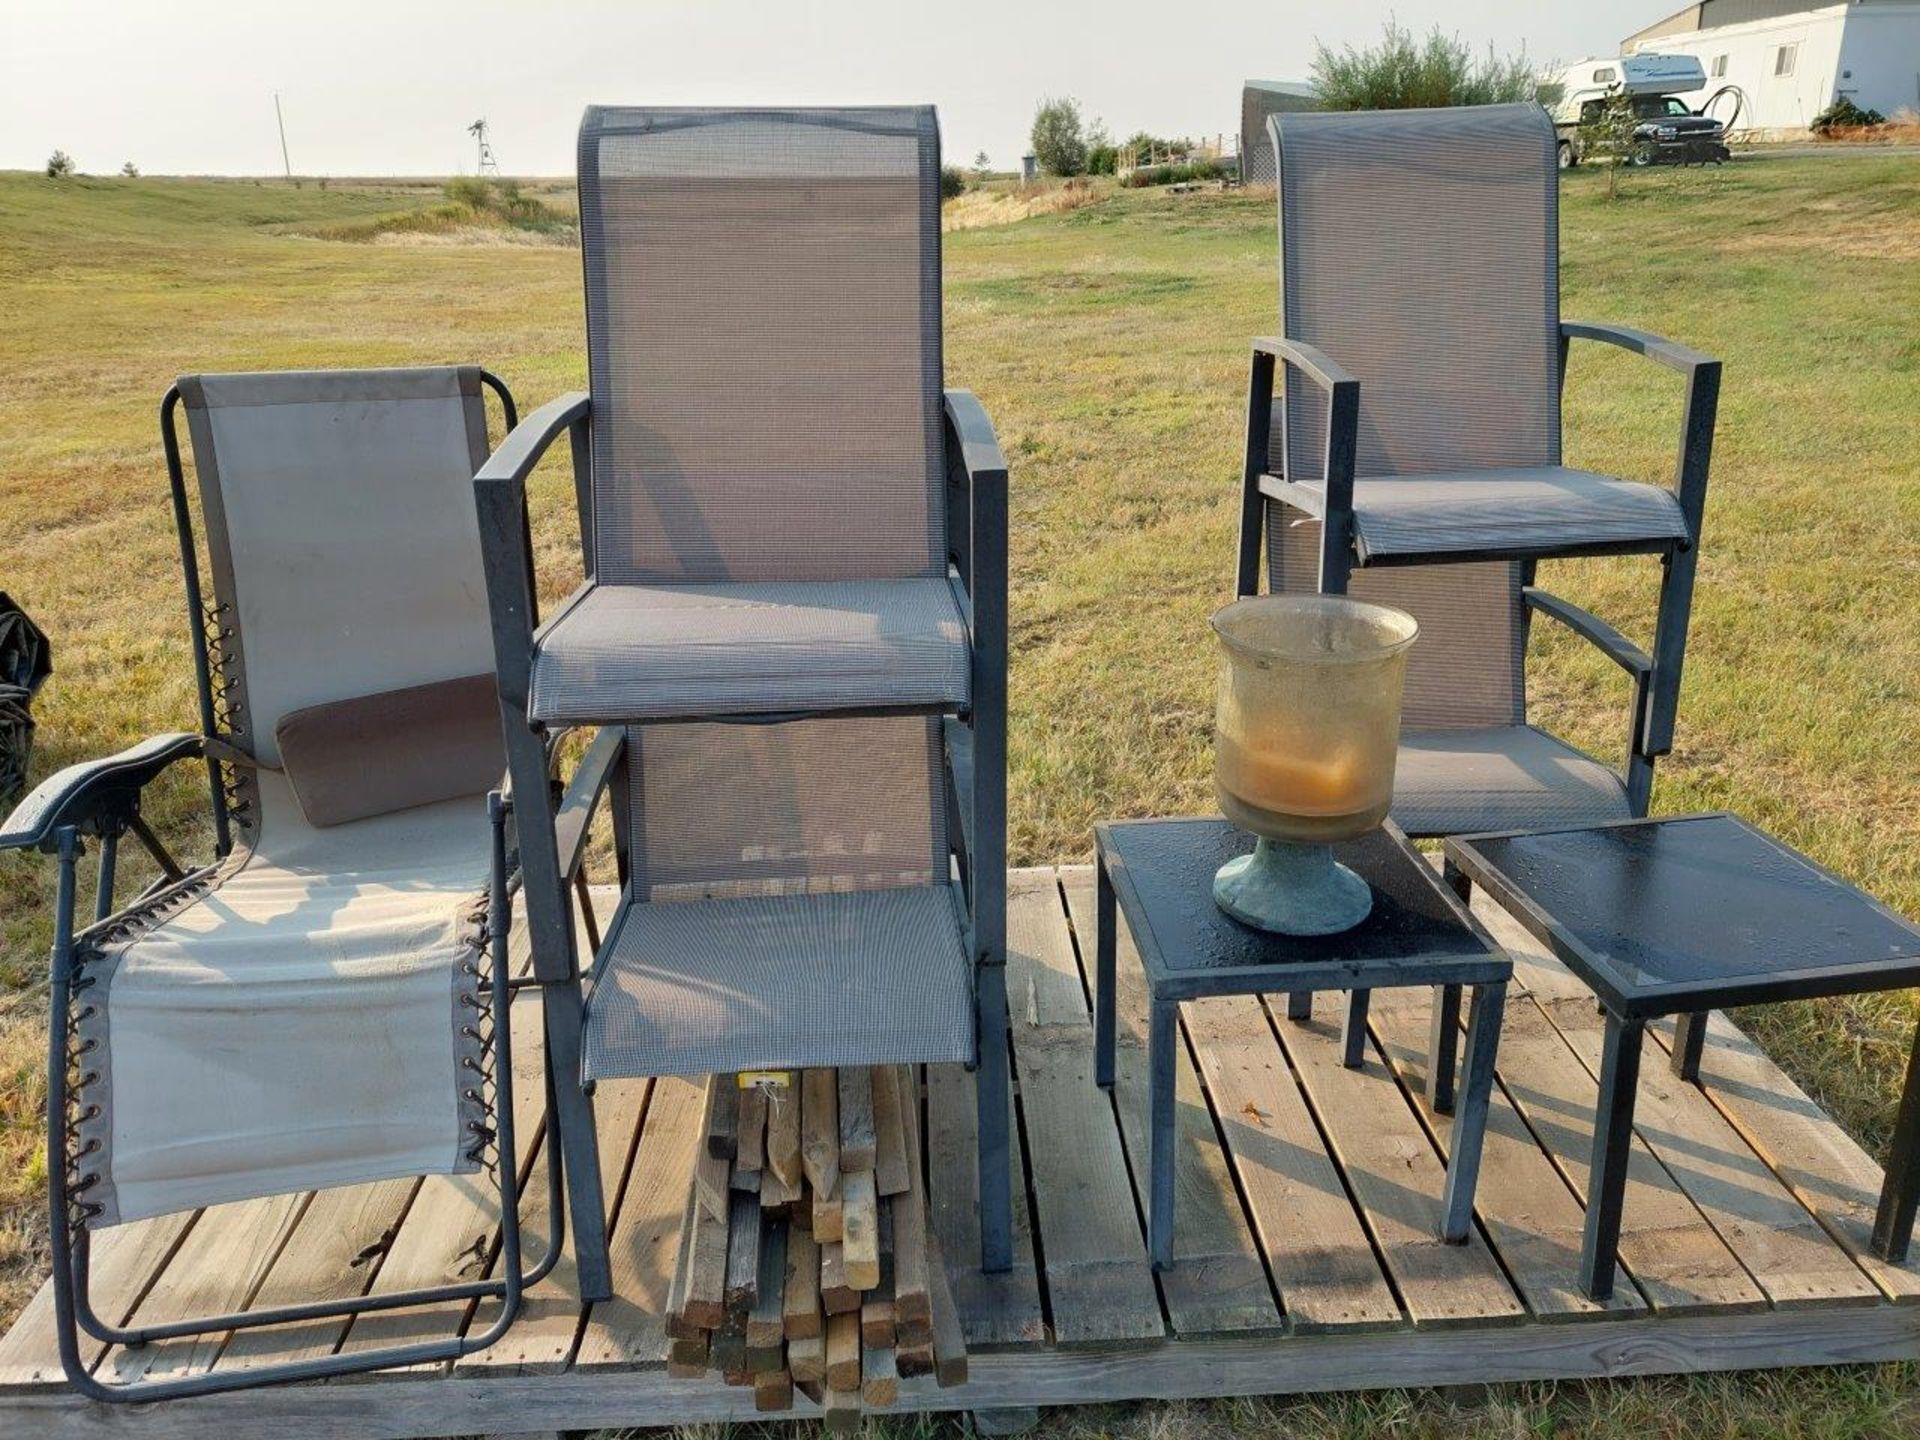 L/O PATIO FURNITURE 4 CHAIRS 2 END TABLES CANDLE AND ZERO-GRAVITY LAWN CHAING - Image 2 of 4